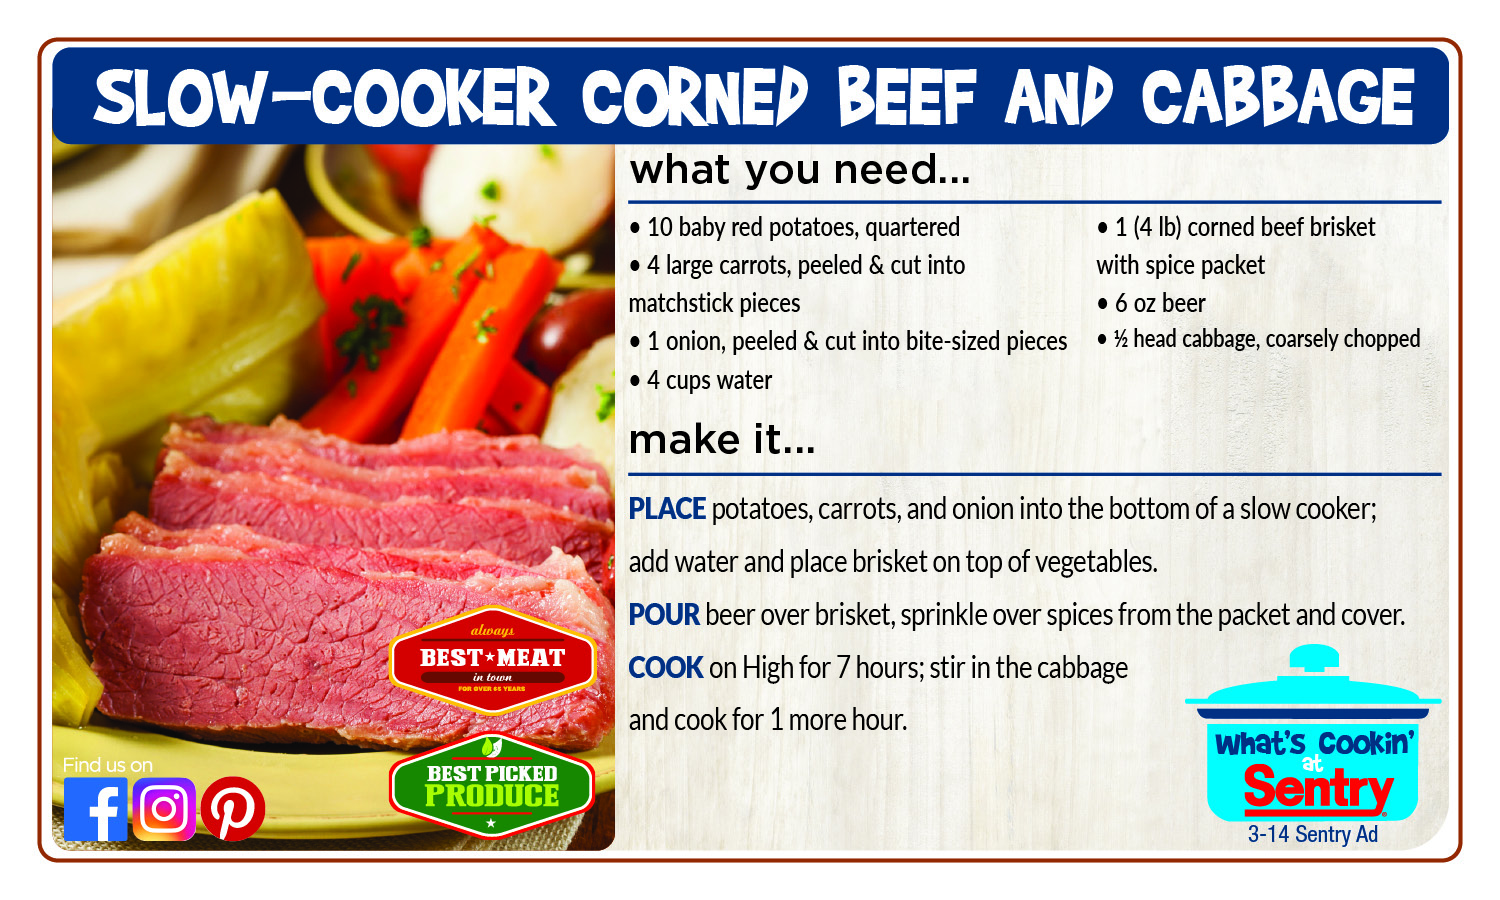 Recipe: Slow-Cooker Corned Beef and Cabbage